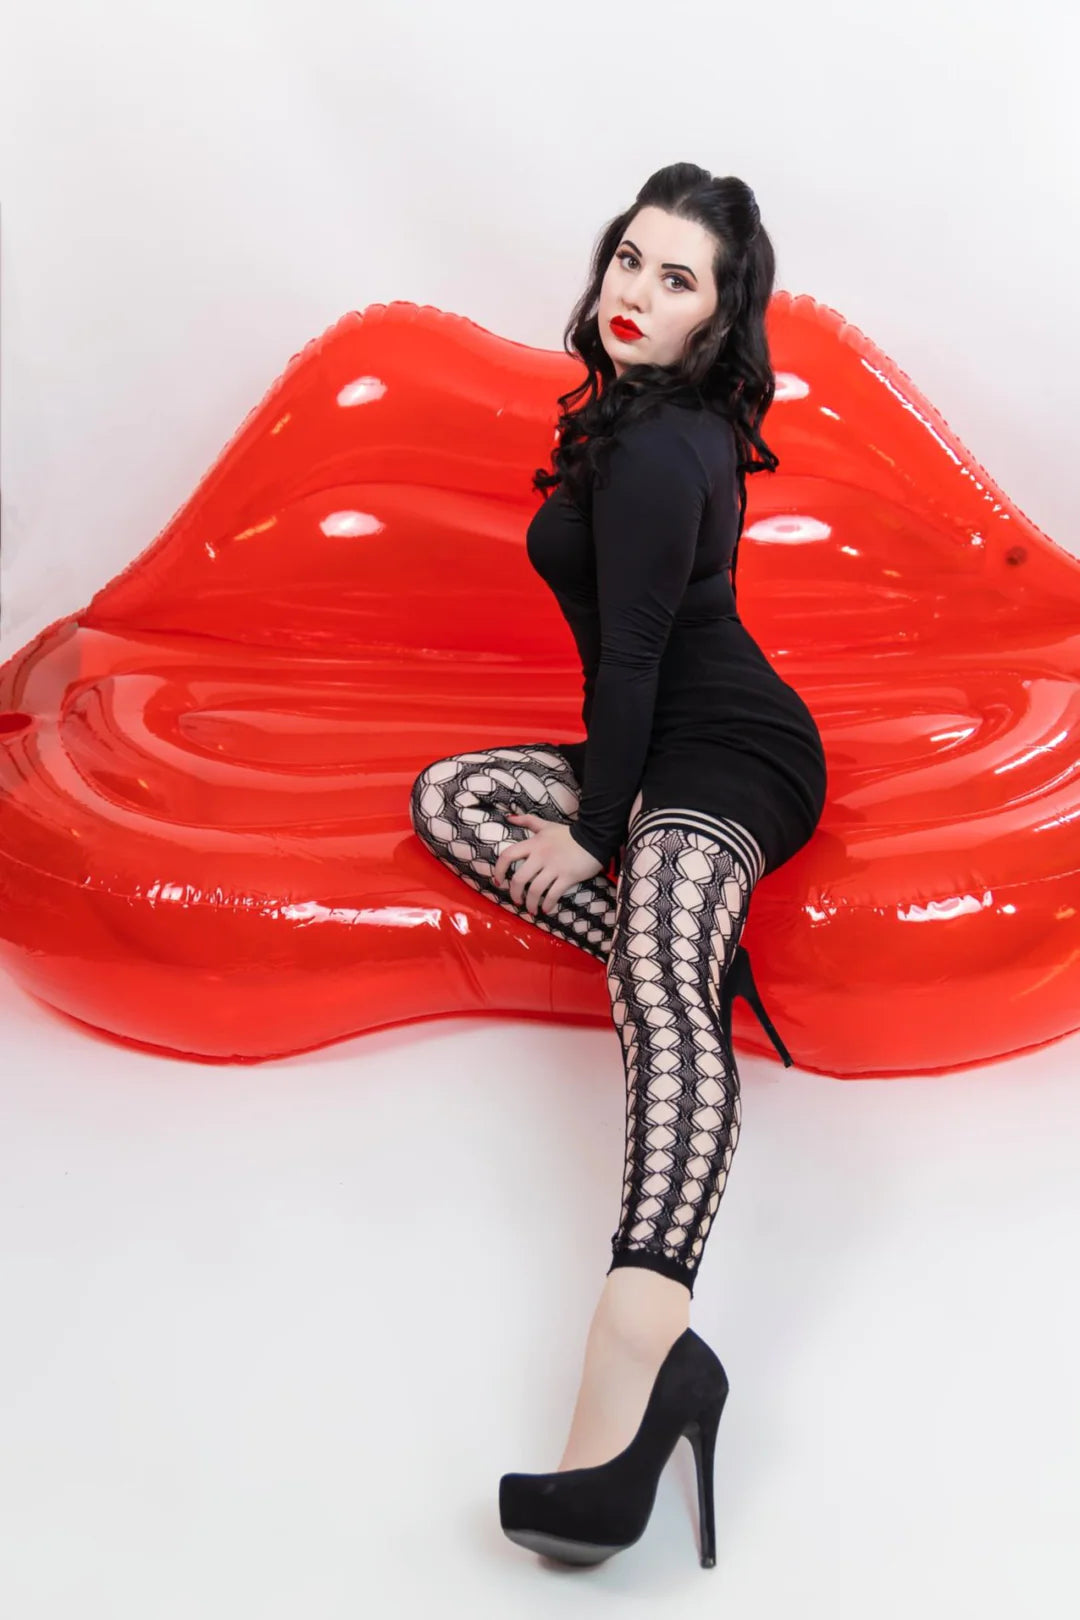 model sitting on inflatable red lip chair with leg extended wearing Jo Footless Thigh Highs